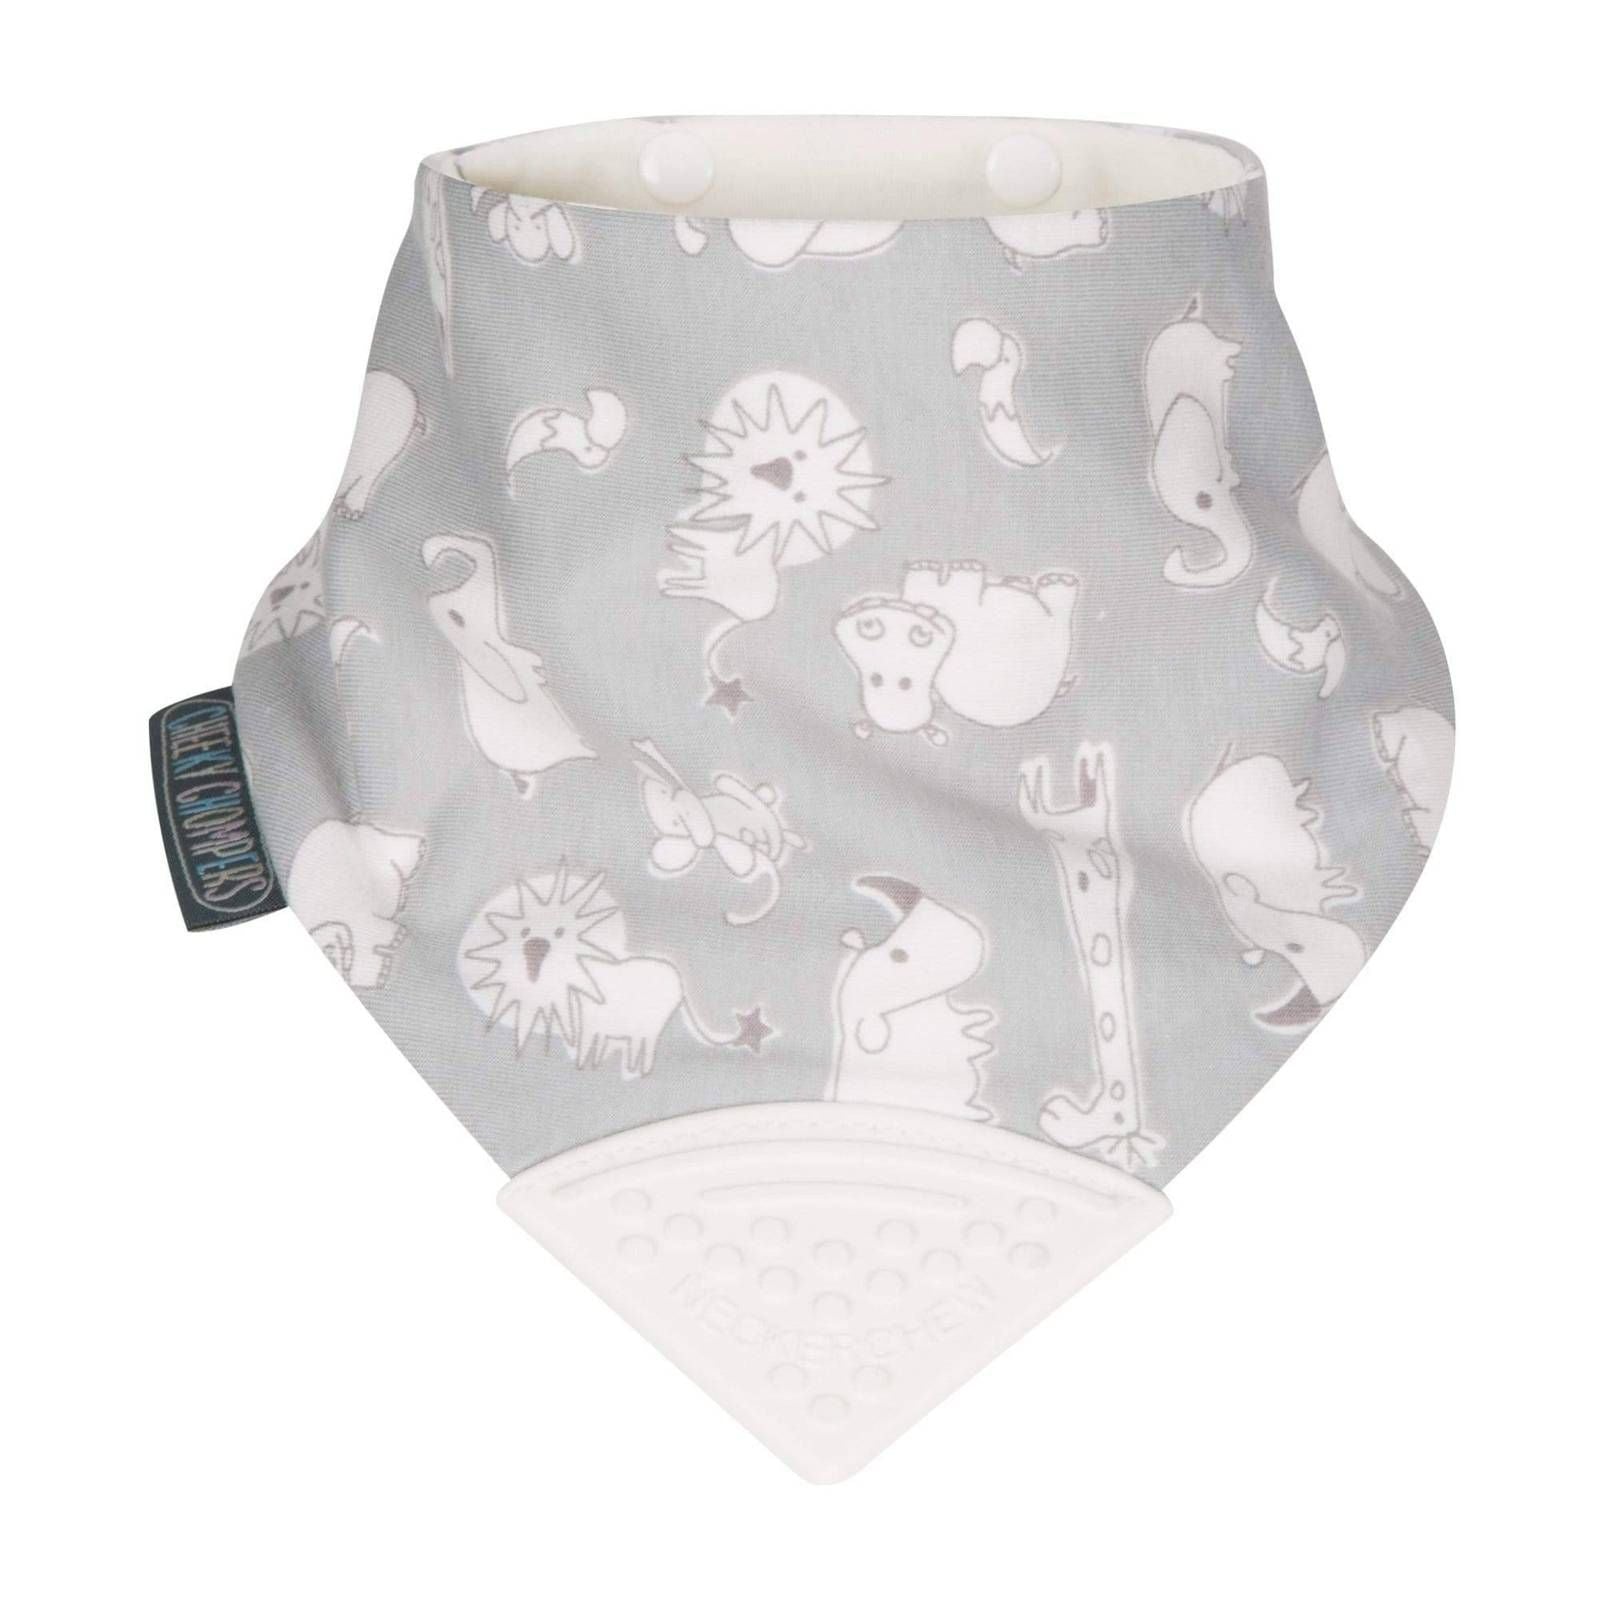 Baby bib in bandana style. Grey with animal print and teether by  Cheeky Chompers